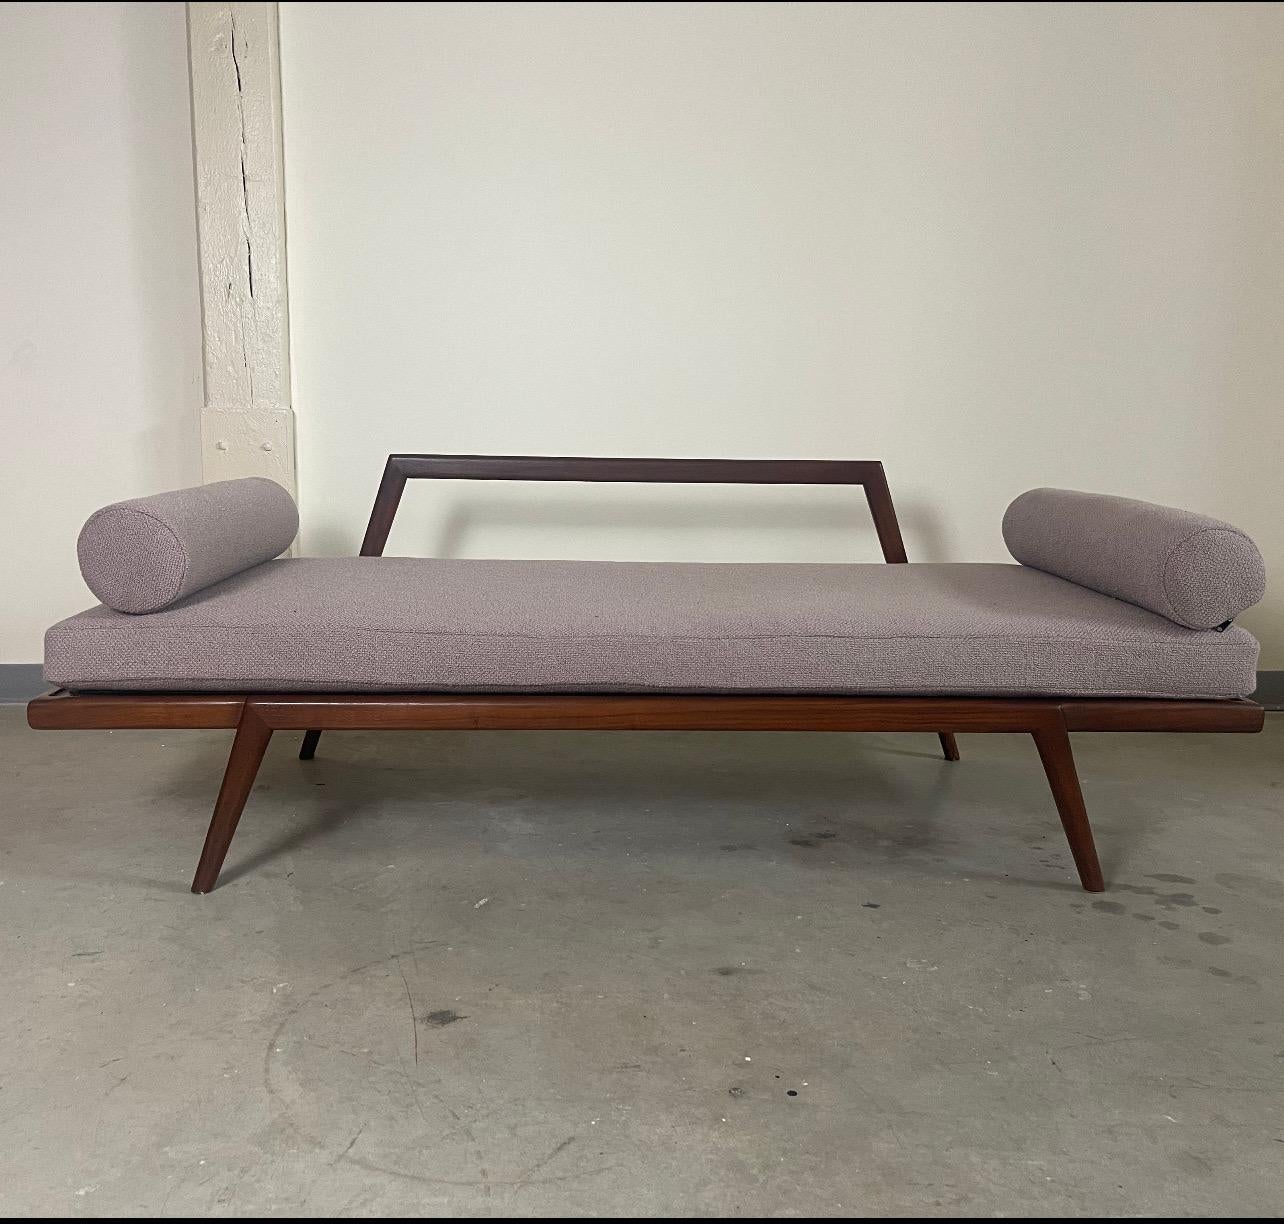 Walnut daybed by Mel Smilow. Professionally refinished and reupholstered in a beige wool boucle fabric.